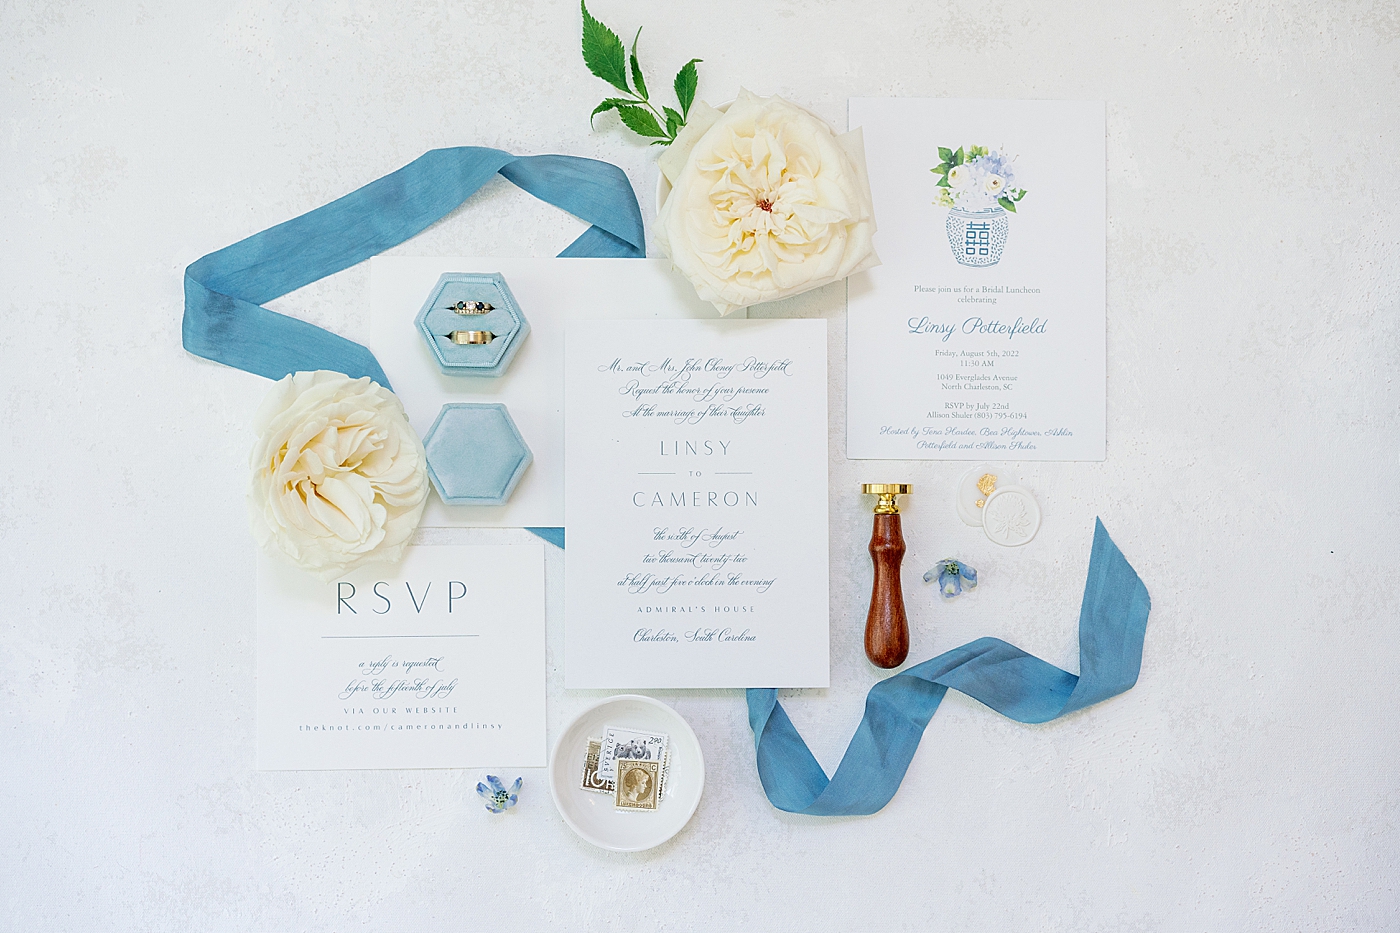 Wedding invitation suite with blue ribbon | Images by Annie Laura Photography